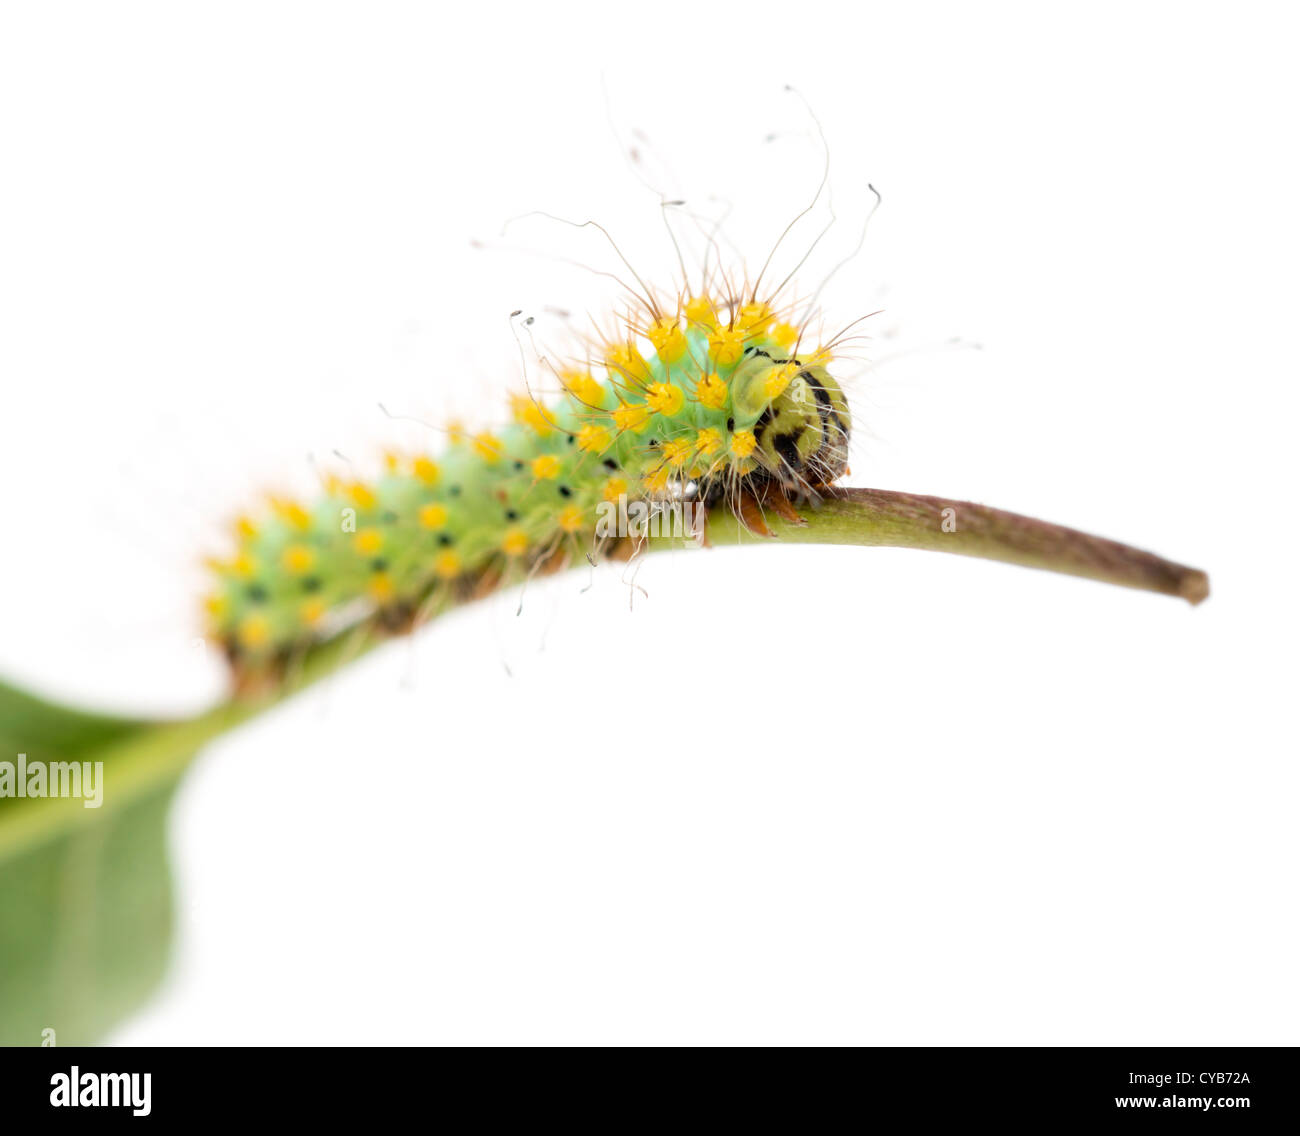 Caterpillar of the Giant Peacock Moth, Saturnia pyri, on plant stem in front of white background Stock Photo